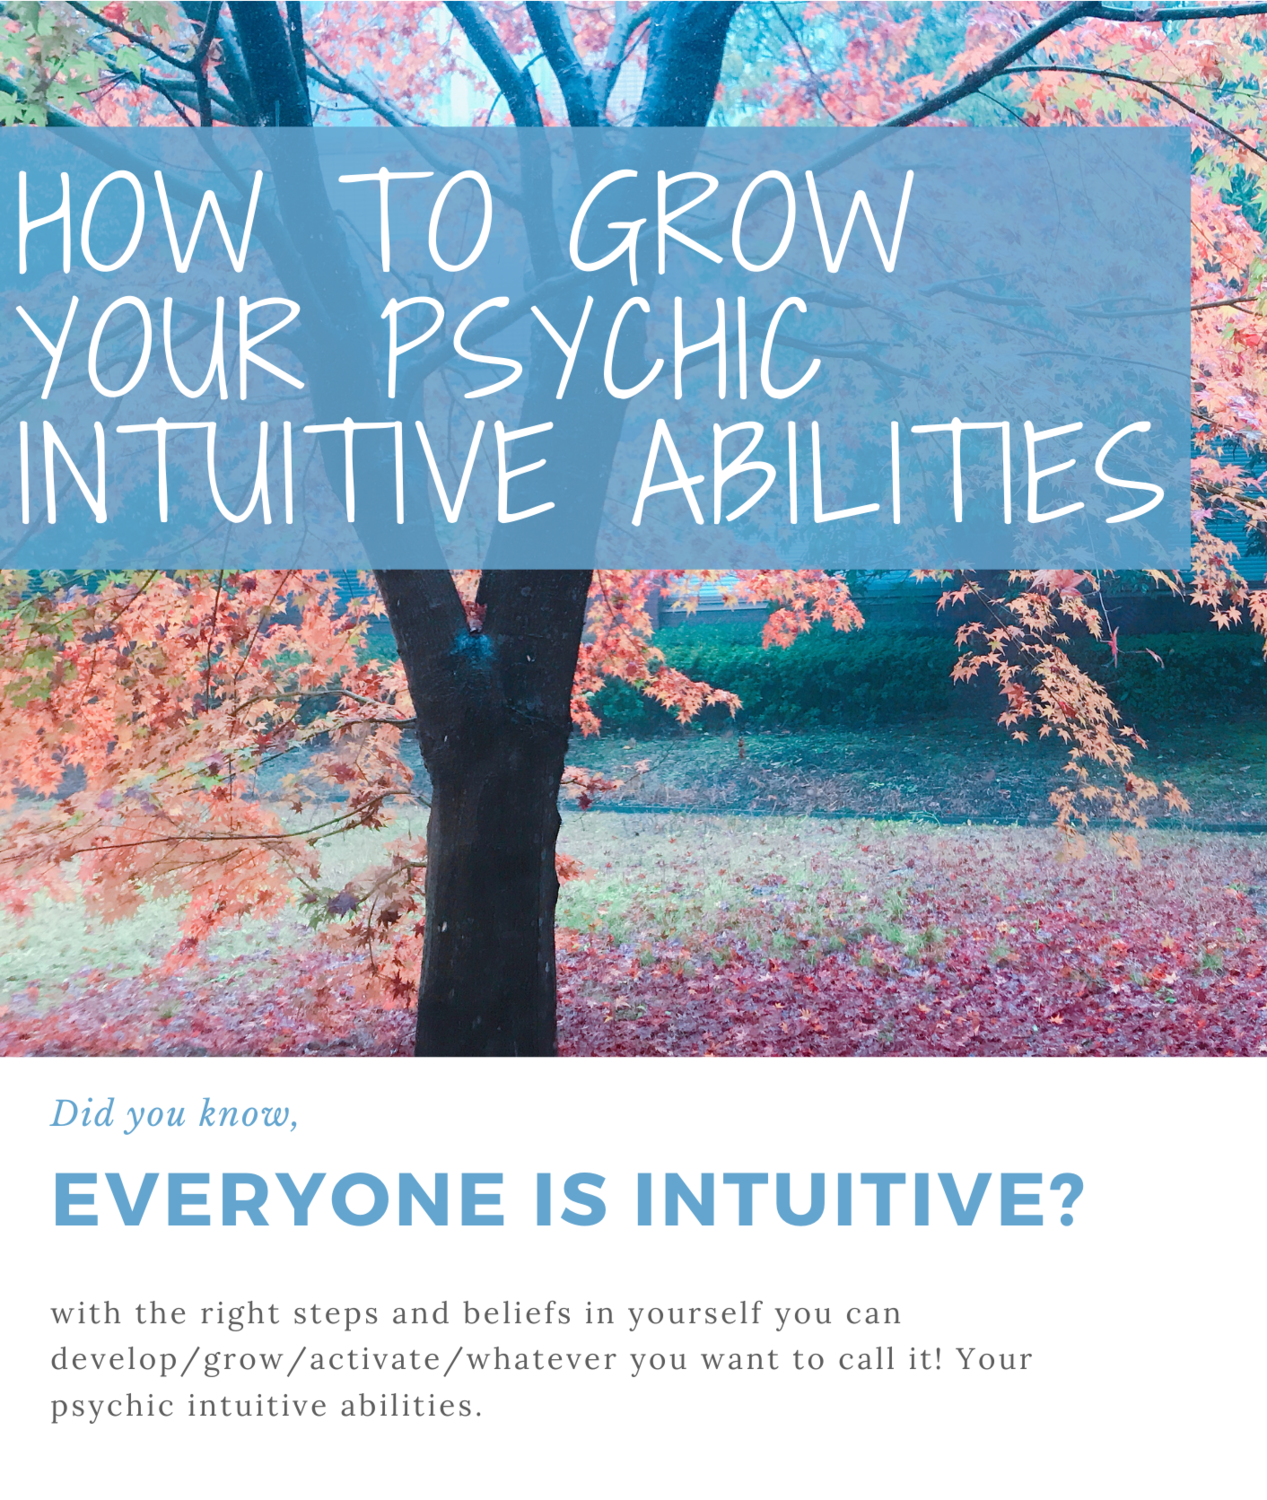 How to Grow Your Intuitive Abilities Workbook